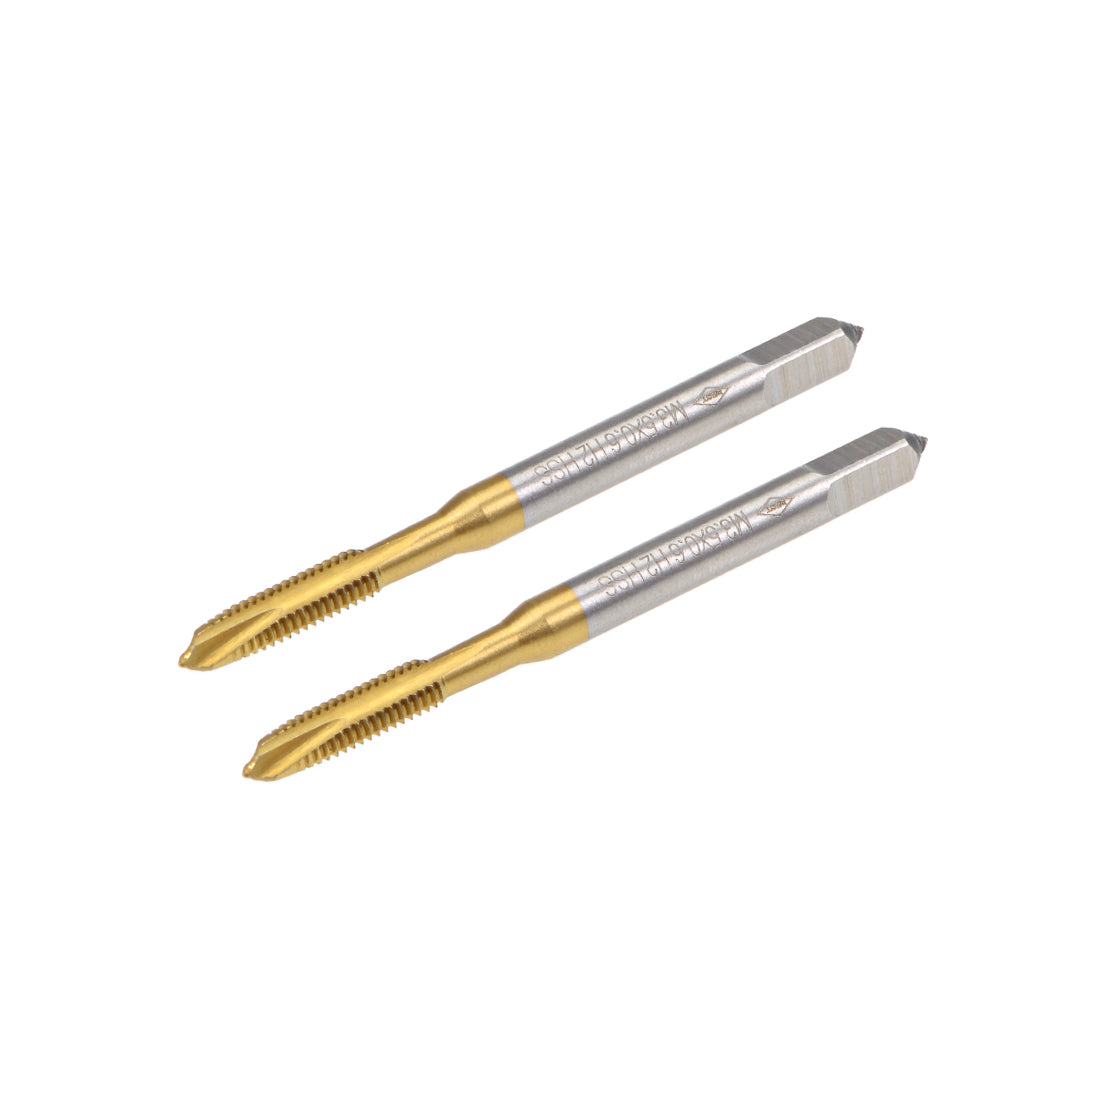 uxcell Uxcell Spiral Point Threading Tap M3.5 Thread 0.6 Pitch Titanium Coated HSS 2pcs